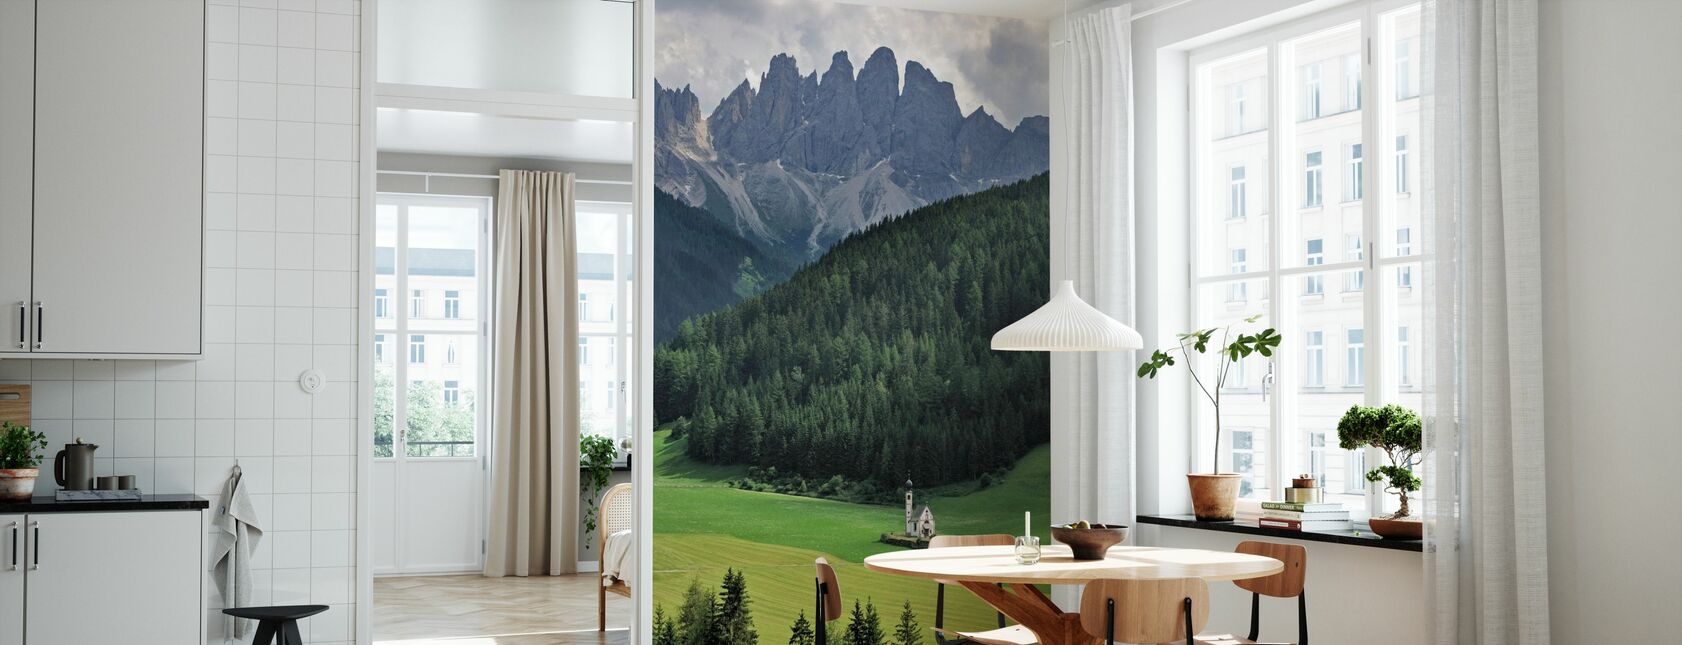 At the Foothills of the Dolomites - Wallpaper - Kitchen